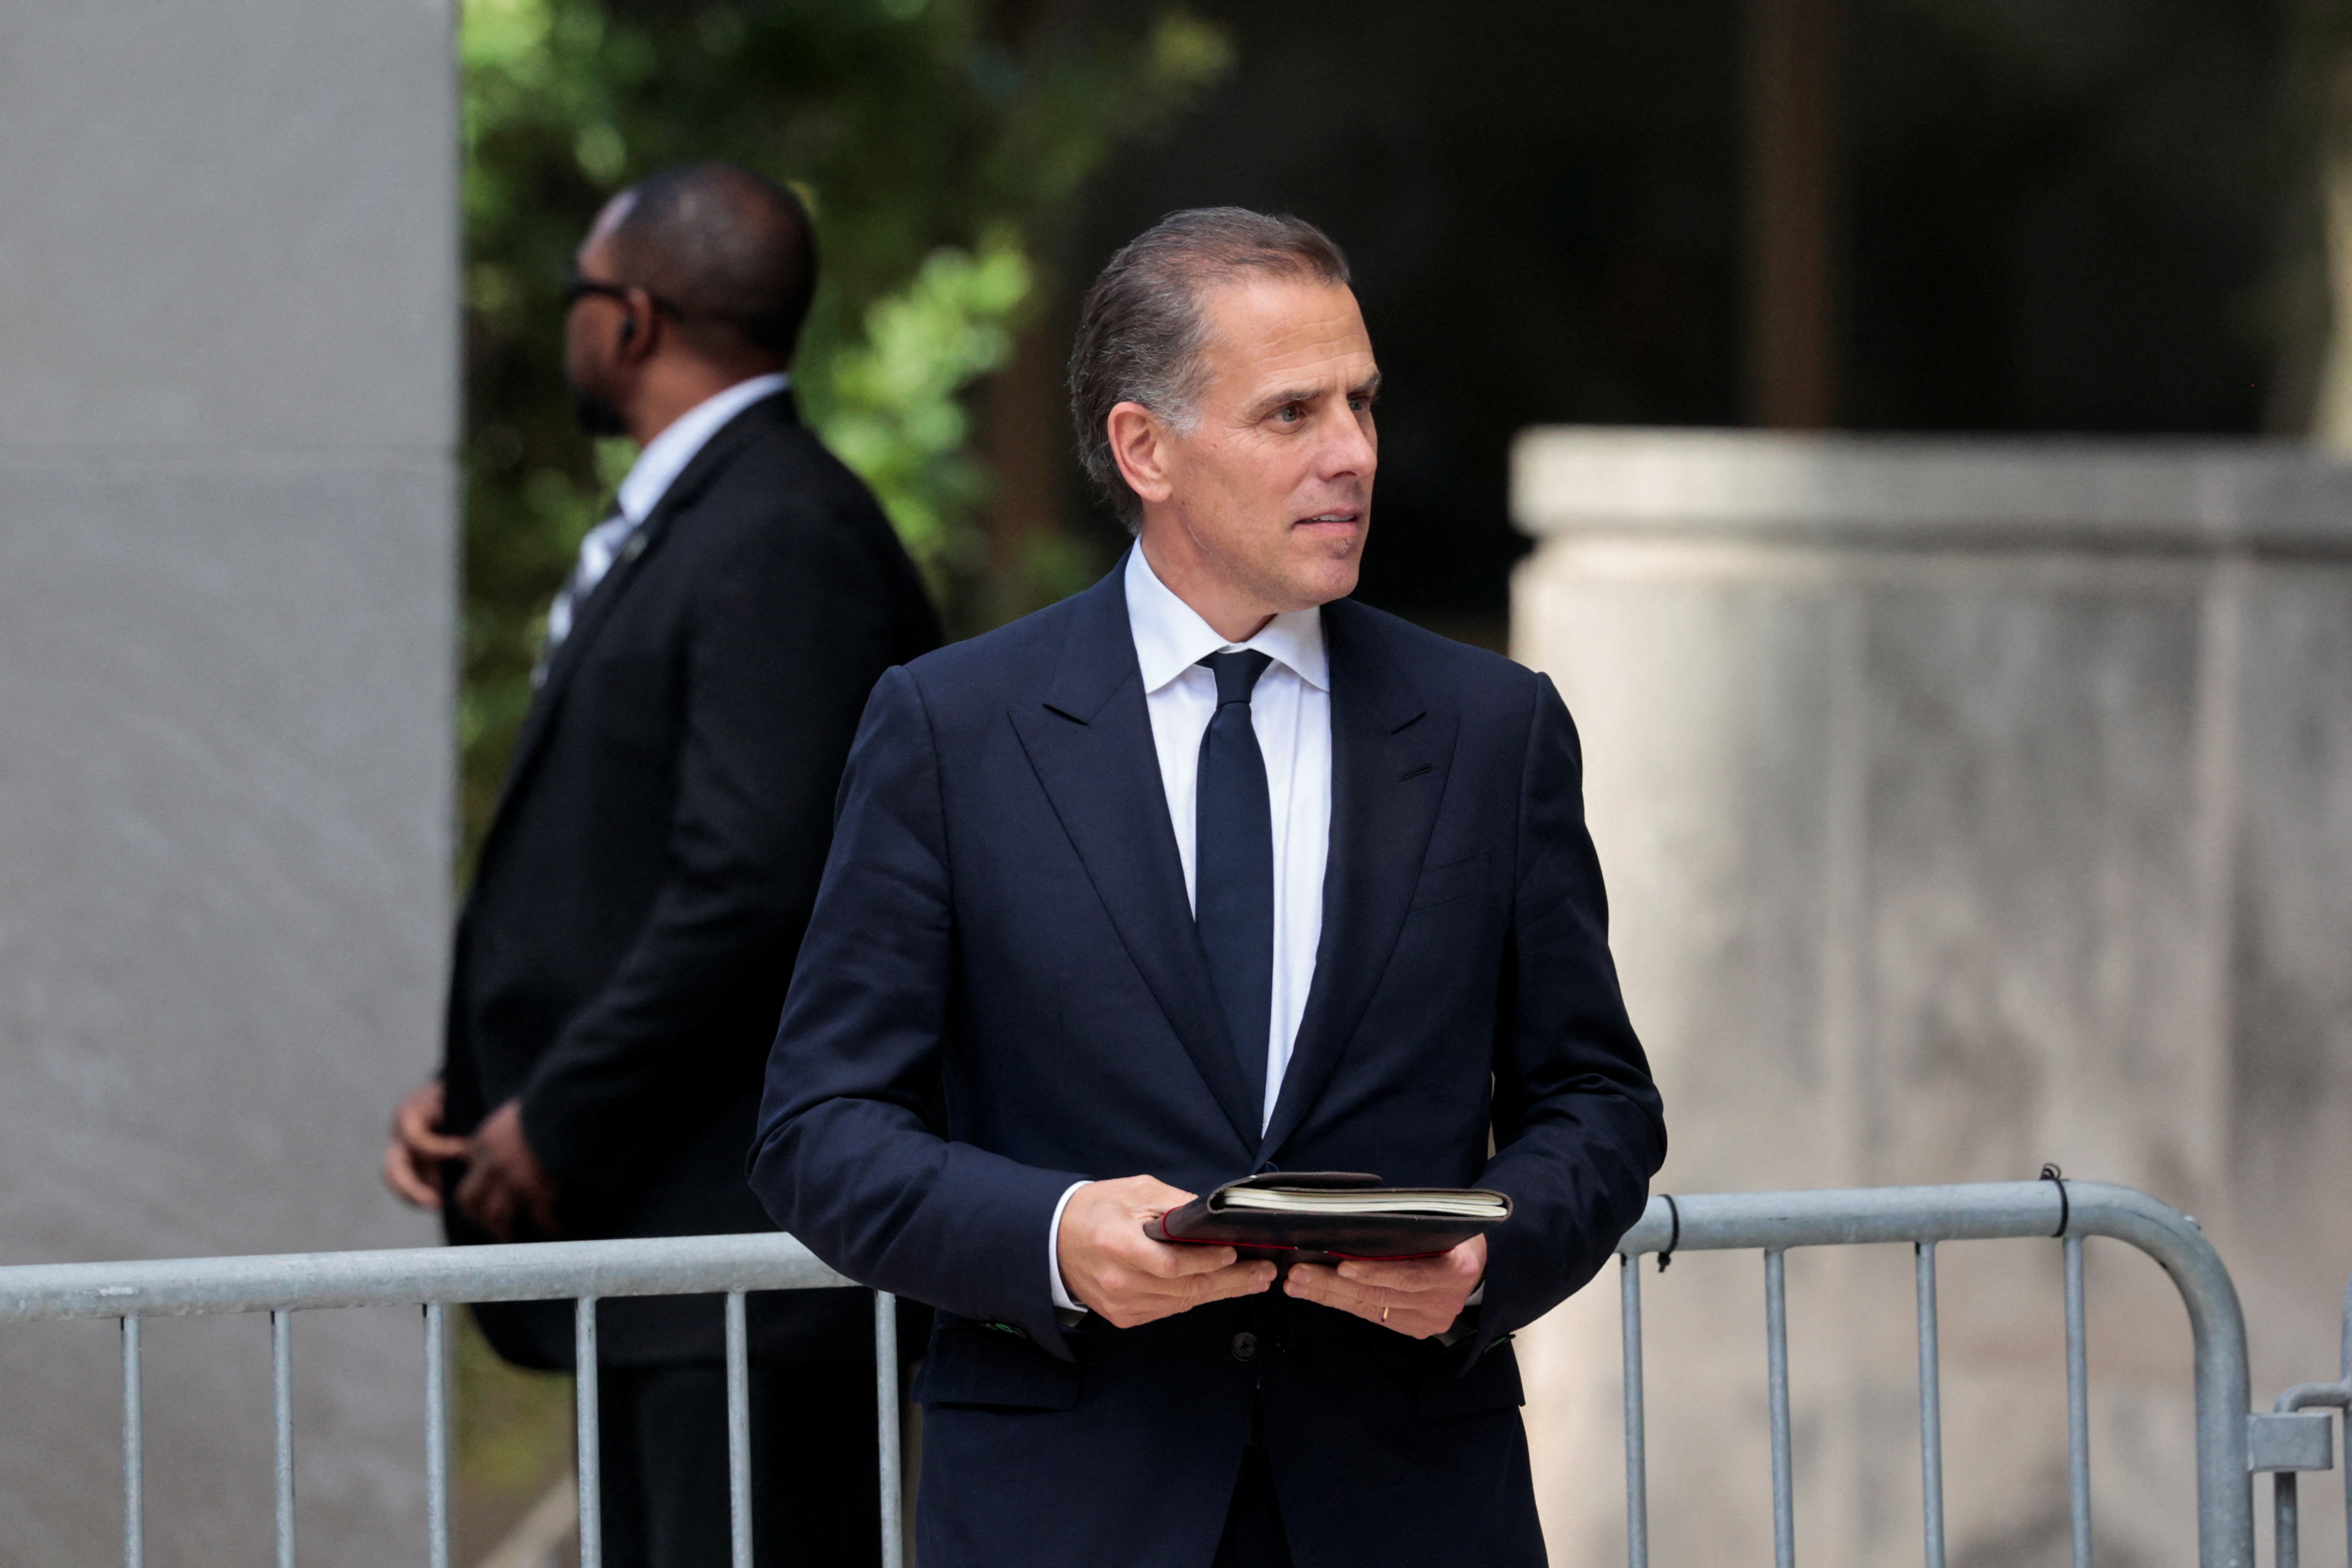 Hunter Biden's trial on criminal gun charges continues, in Wilmington